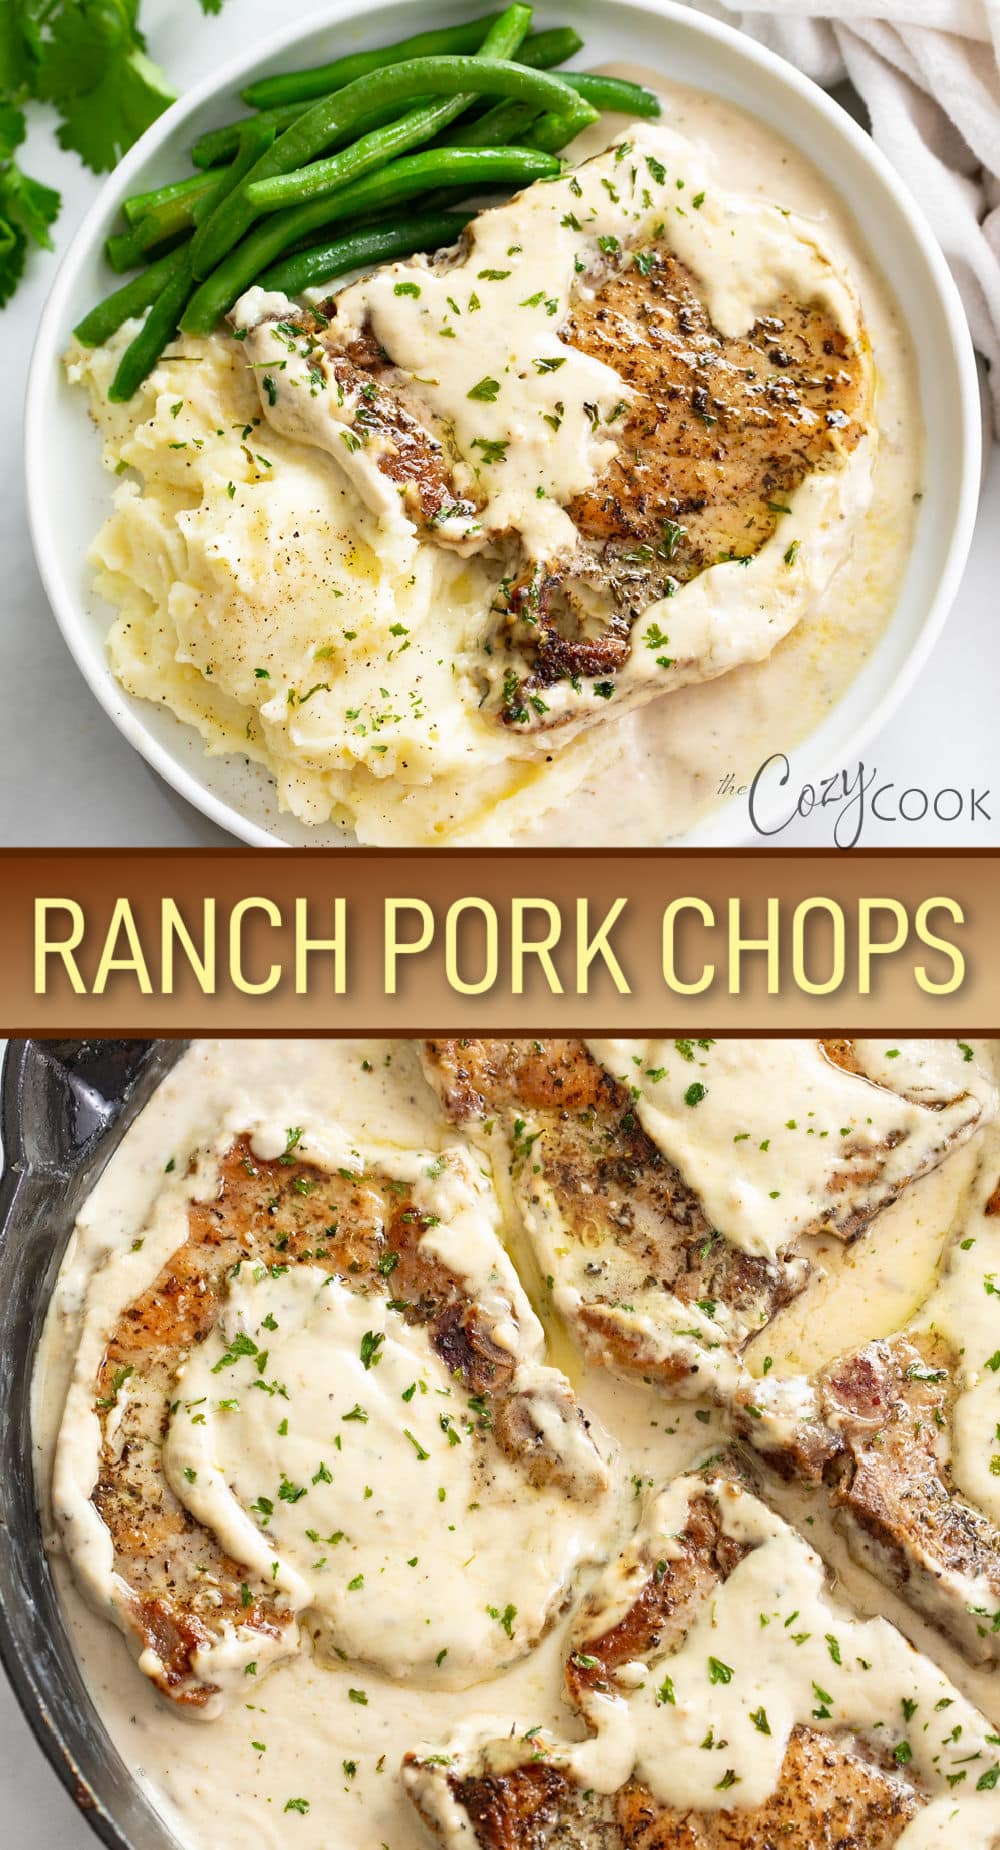 Ranch Pork Chops - The Cozy Cook